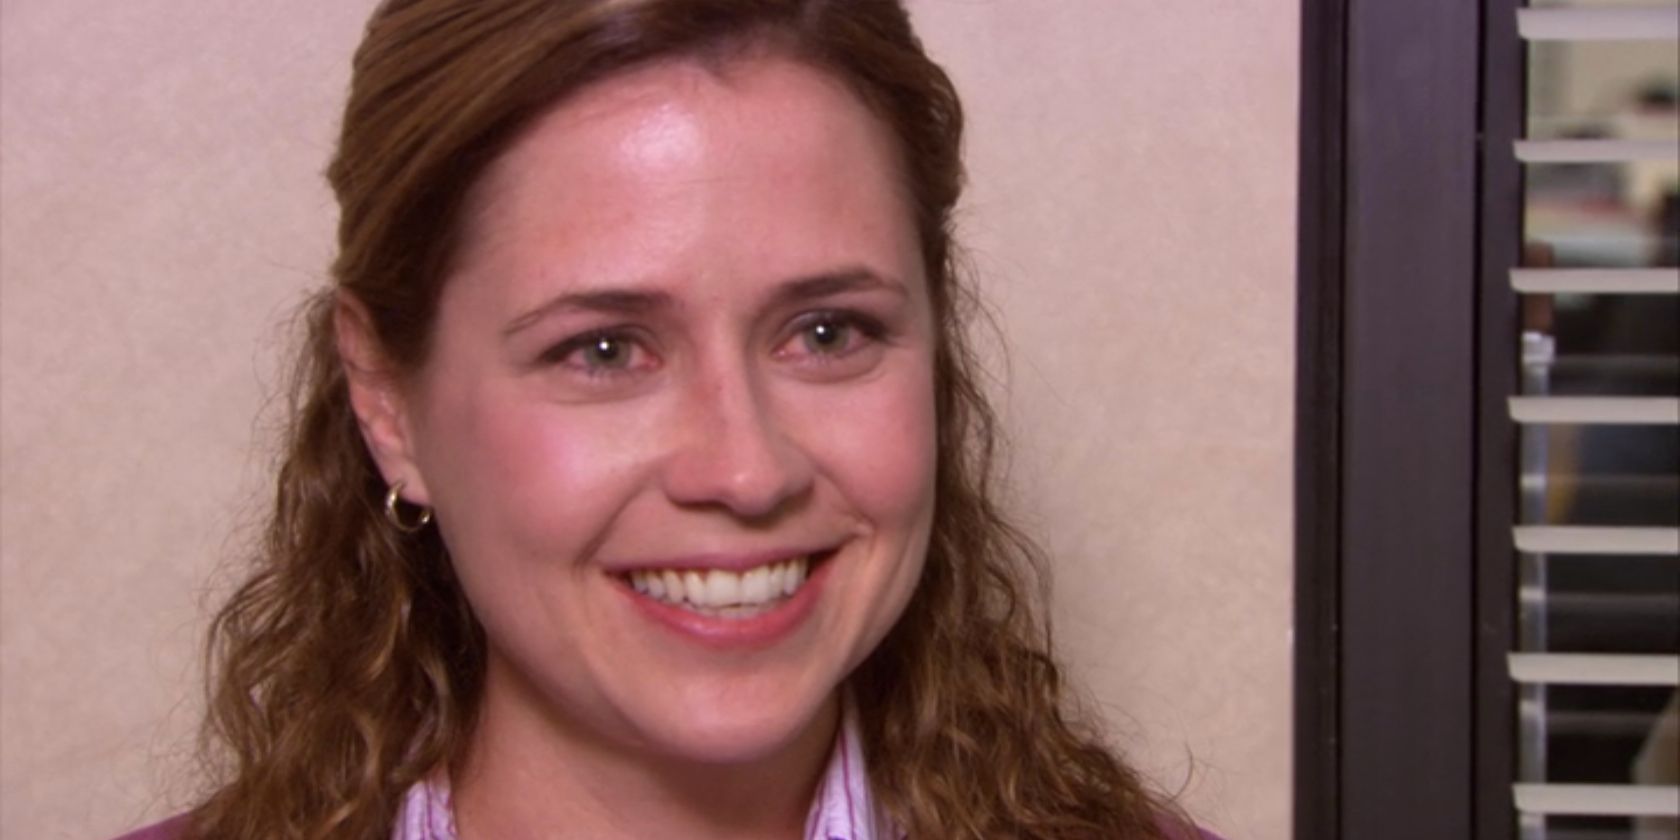 Jenna Fischer as Pam Beesly in The Office